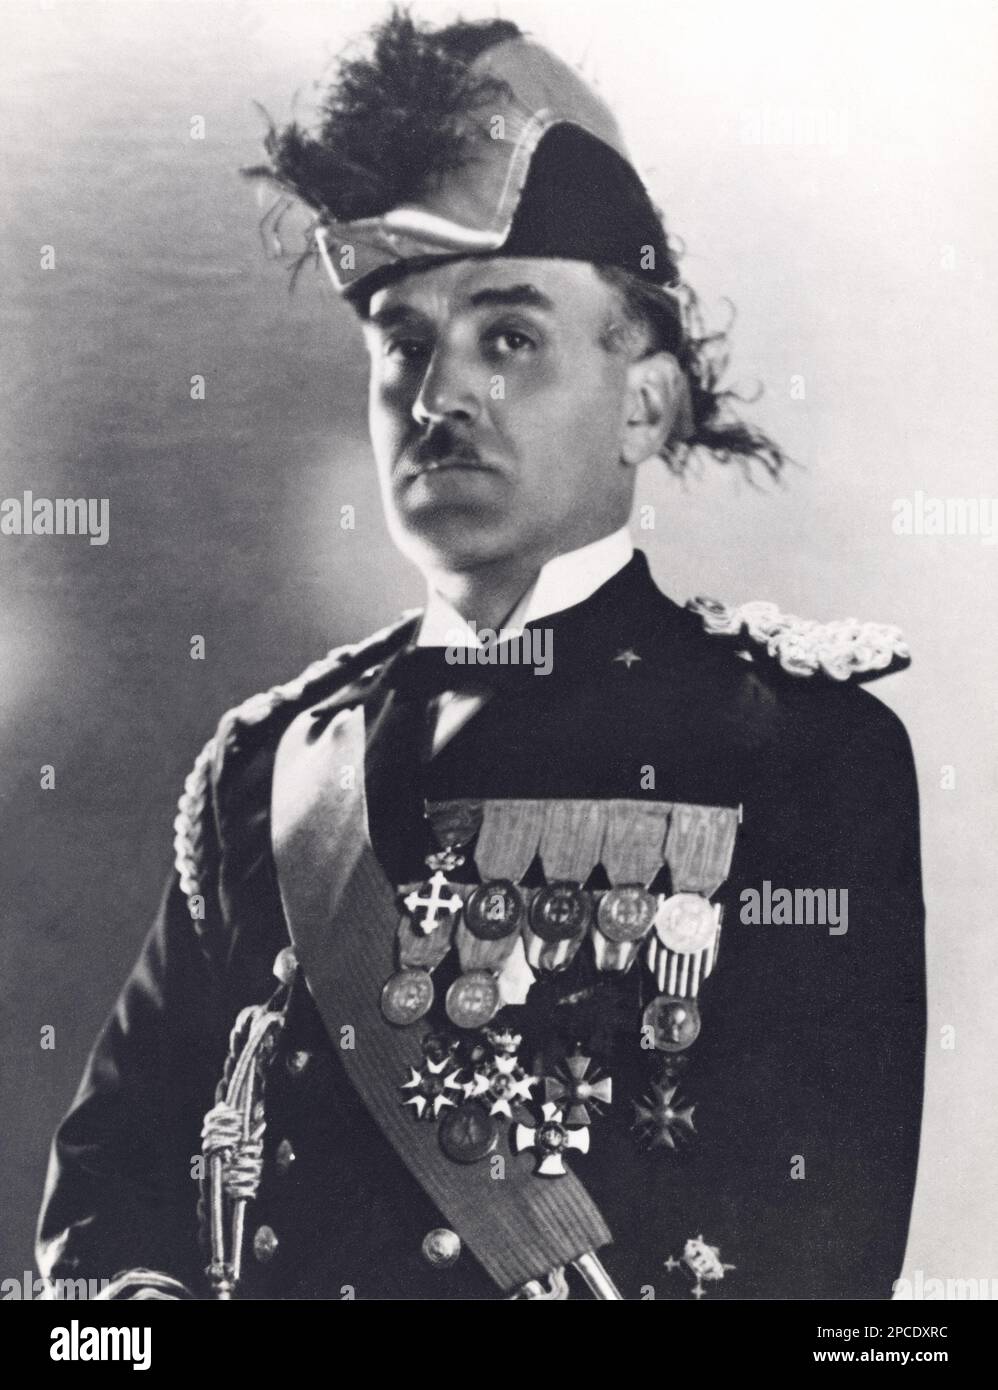 1930's , ITALY :  The italian Ammiraglio LUIGI RIZZO Conte di Grado e di Premuda  ( 1887 - 1951 ). Served with the Italian Royal Navy ( Regia Marina ) during World War I and received numerous decorations. He took part as a volunteer in the Impresa Fiumana with Gabriele D'ANNUNZIO and during the War of Ethiopia. Promoted Ammiraglio di Squadra in the Naval Reserve in September 1943 as president of Cantieri Riuniti dell'Adriatico ordered the sabotage of transatlantic ships and not falling into German hands. For this directive was deported to Germany with her daughter Guglielmina.  - foto storiche Stock Photo